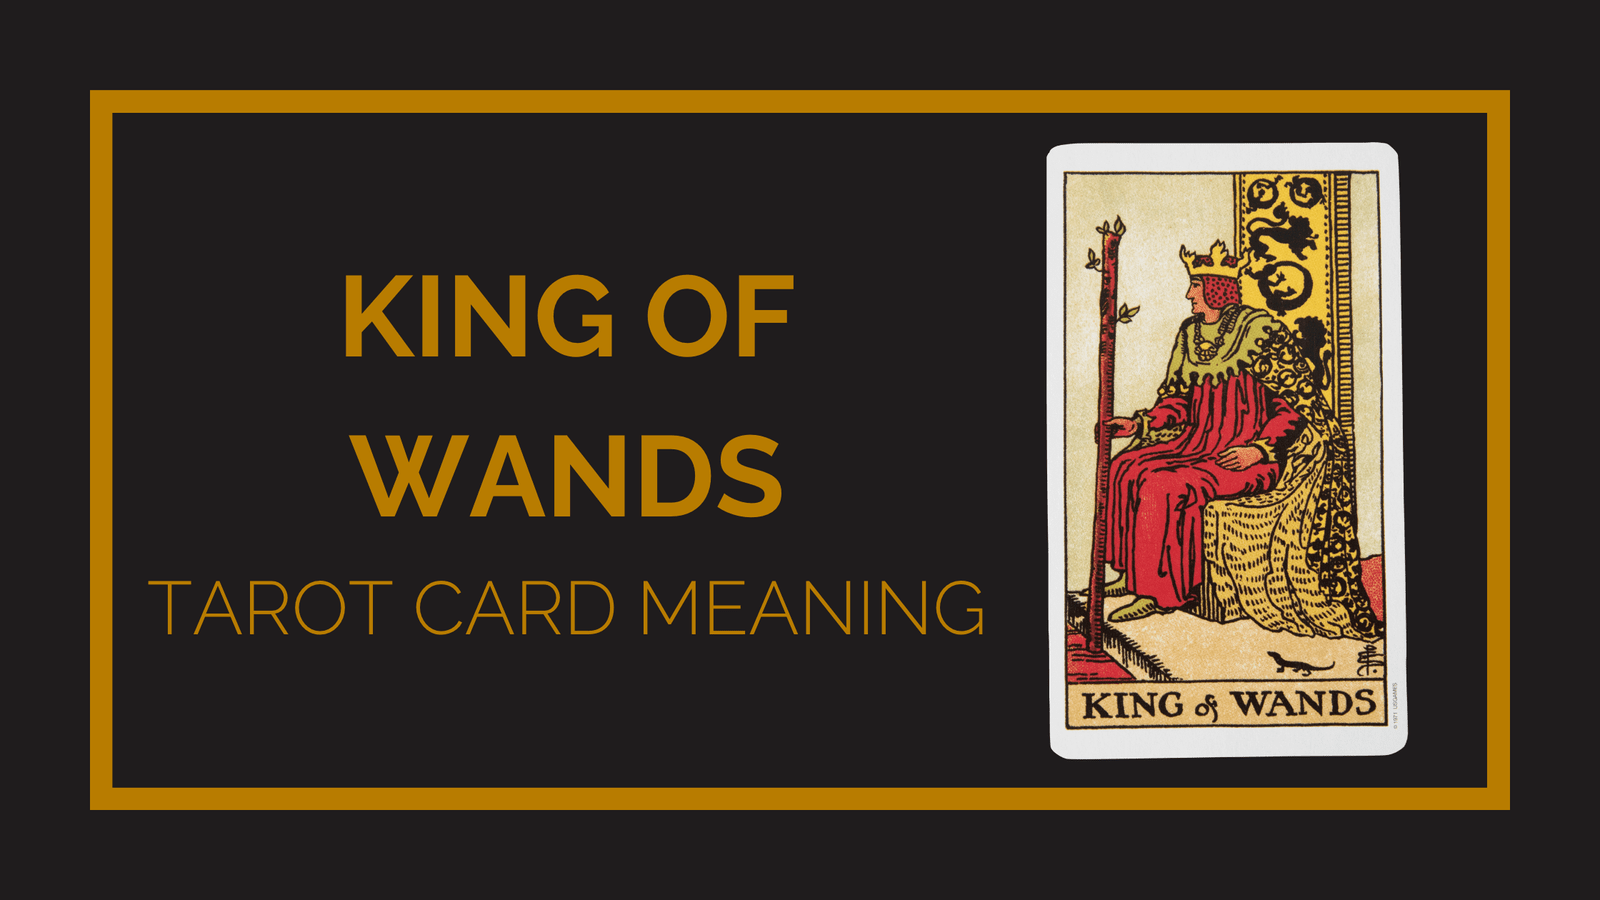 King of wands tarot card meaning | tarot with gord